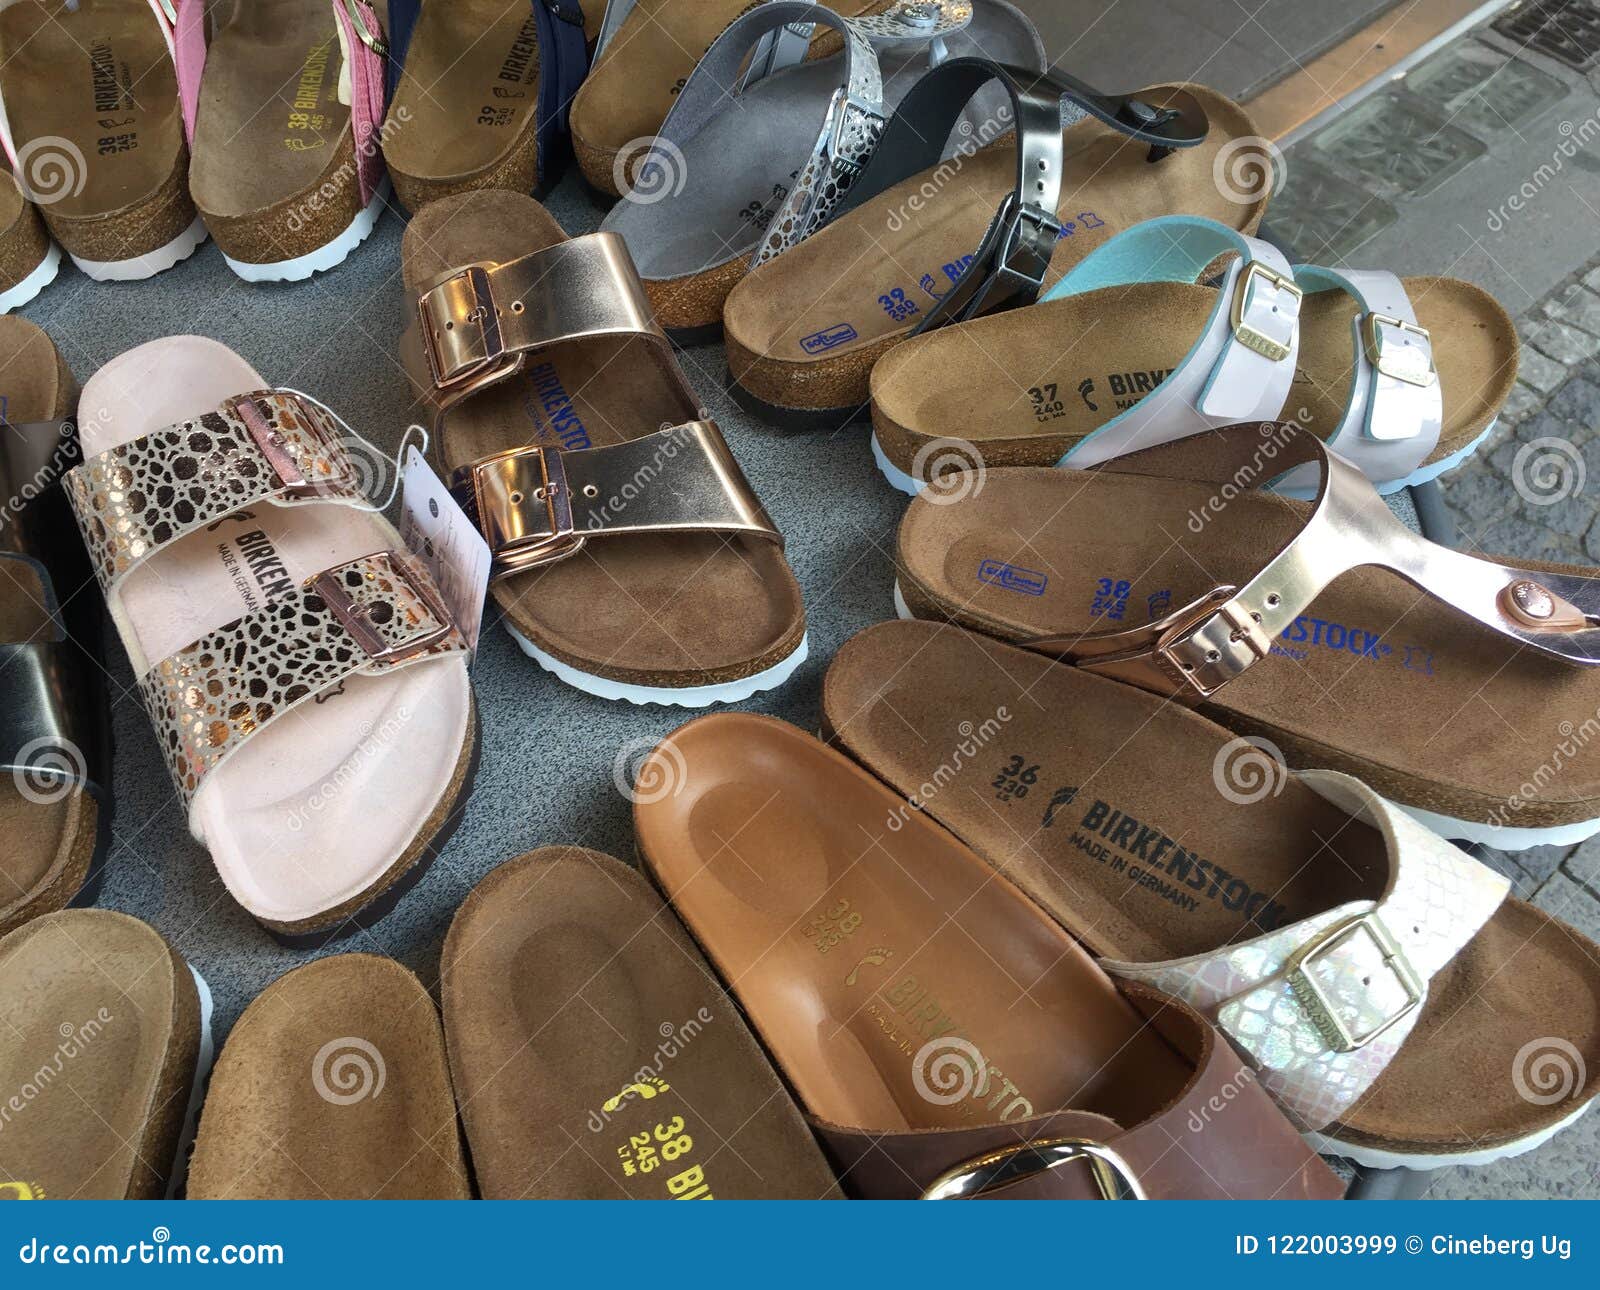 Birkenstock Shop Stock Photos - Free & Royalty-Free Stock Photos from  Dreamstime